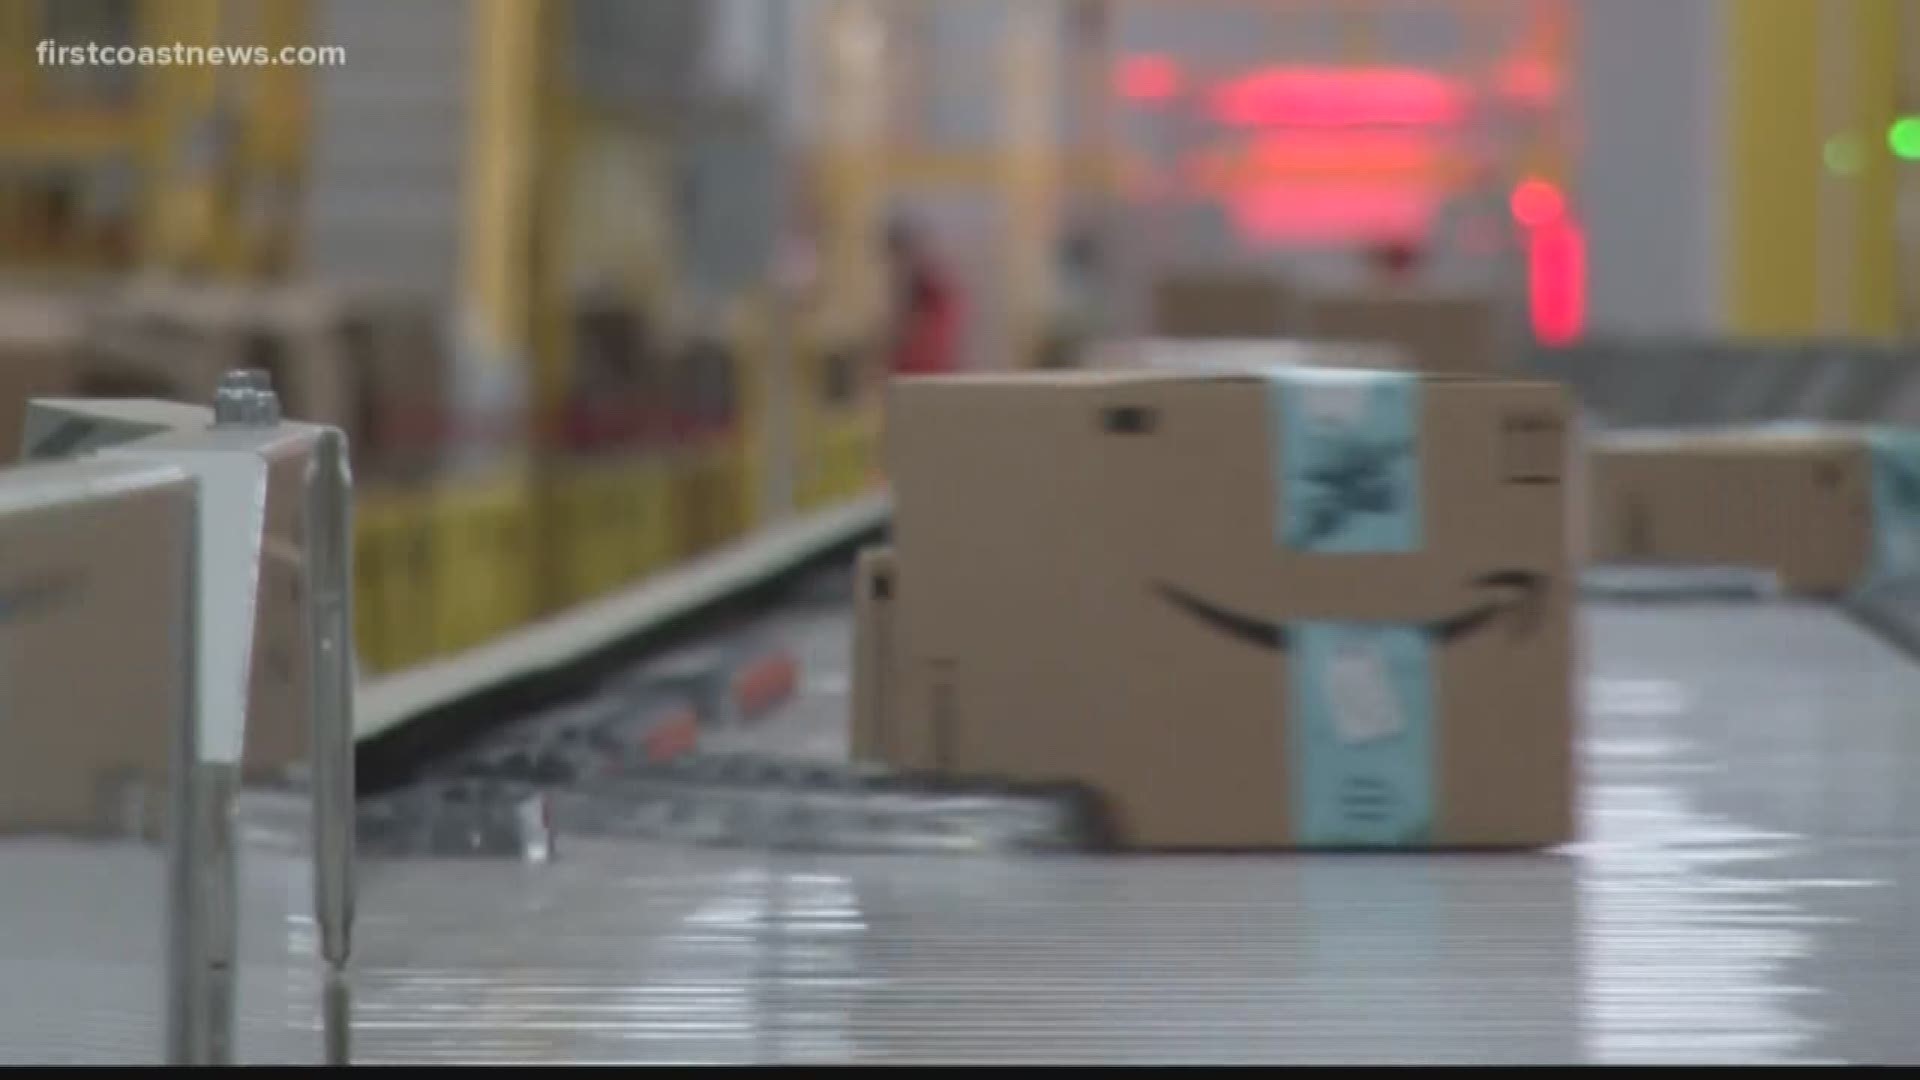 Many Amazon warehouse workers said the company never told them an employee tested positive for COVID-19.